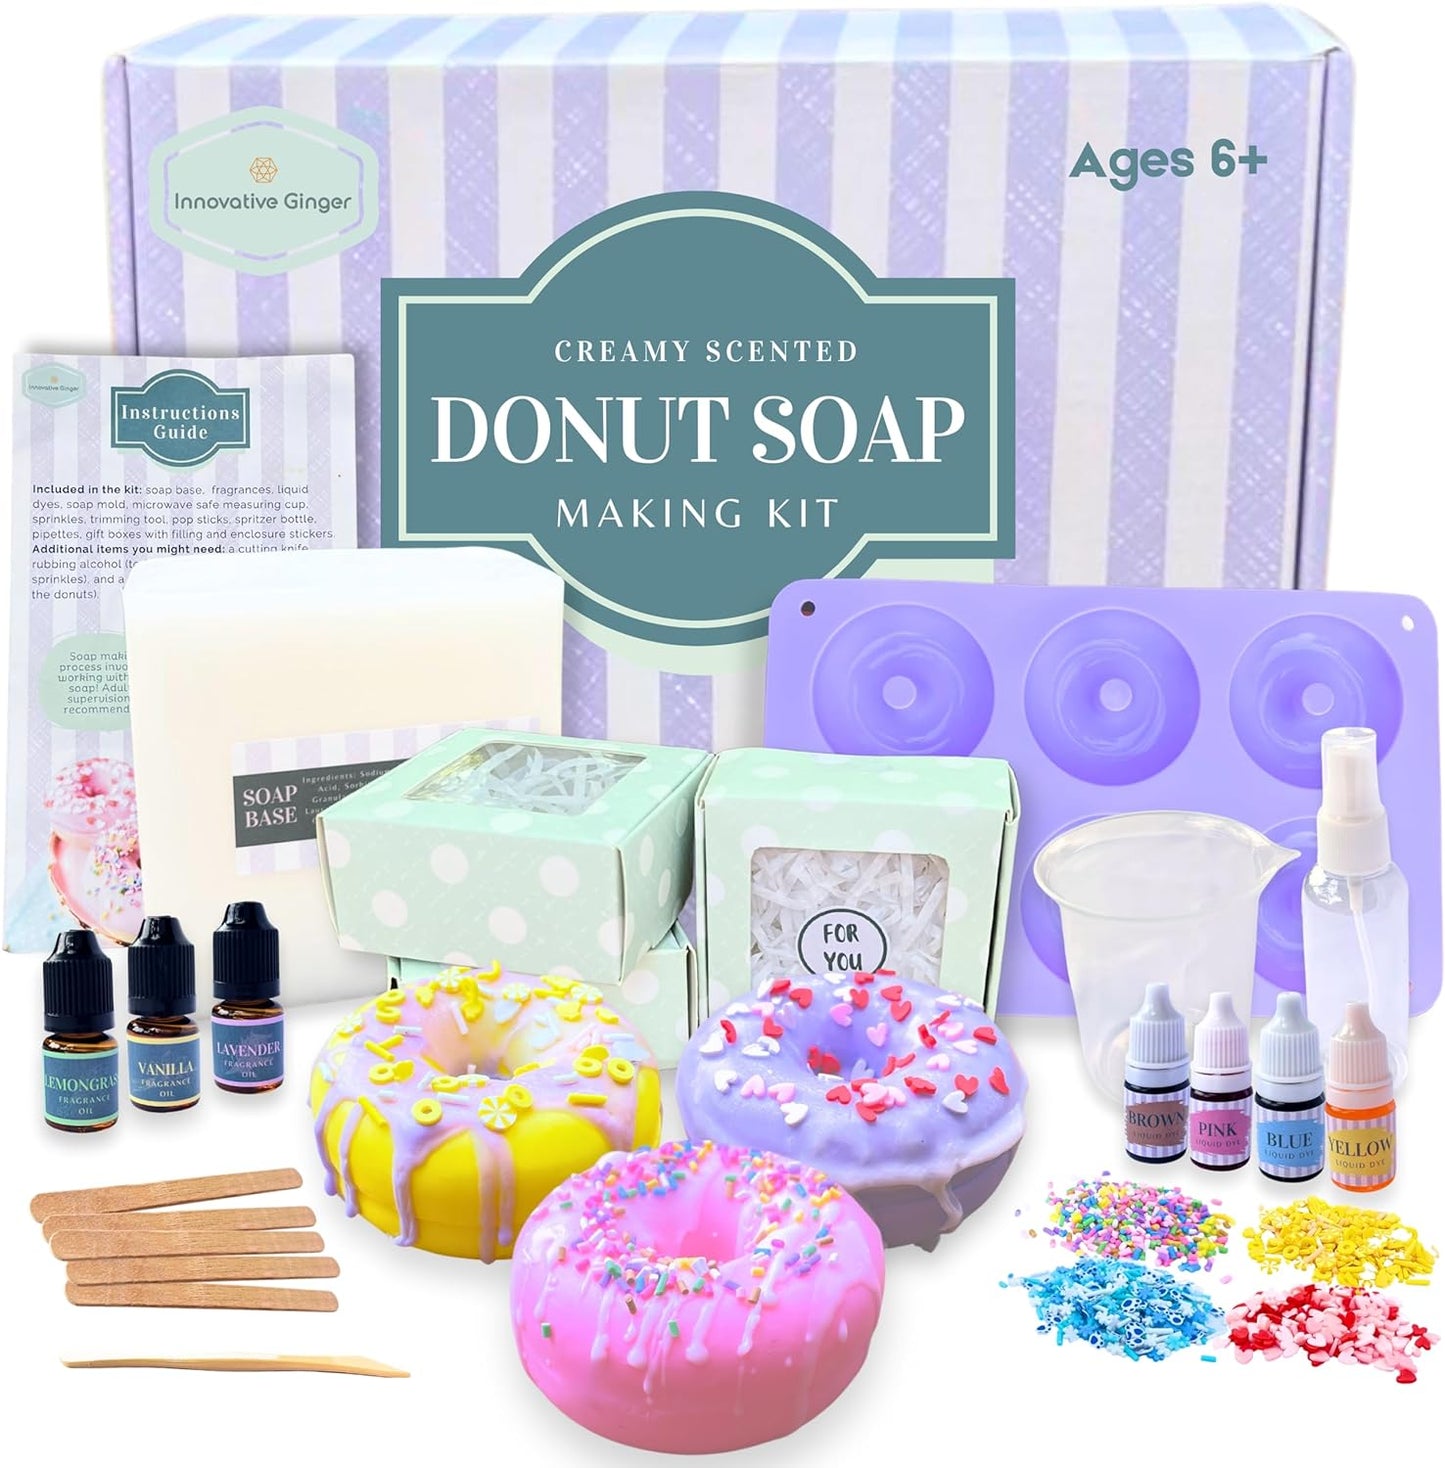 DIY Donut Soap Making Craft Kit for Kids, Teens, and Adults - Fun, Easy, Creative - Large Soap Donuts - Perfect Birthday & Holiday Gift - High Quality, Mess-Free, All-In-One Kit - Loved by All Ages!